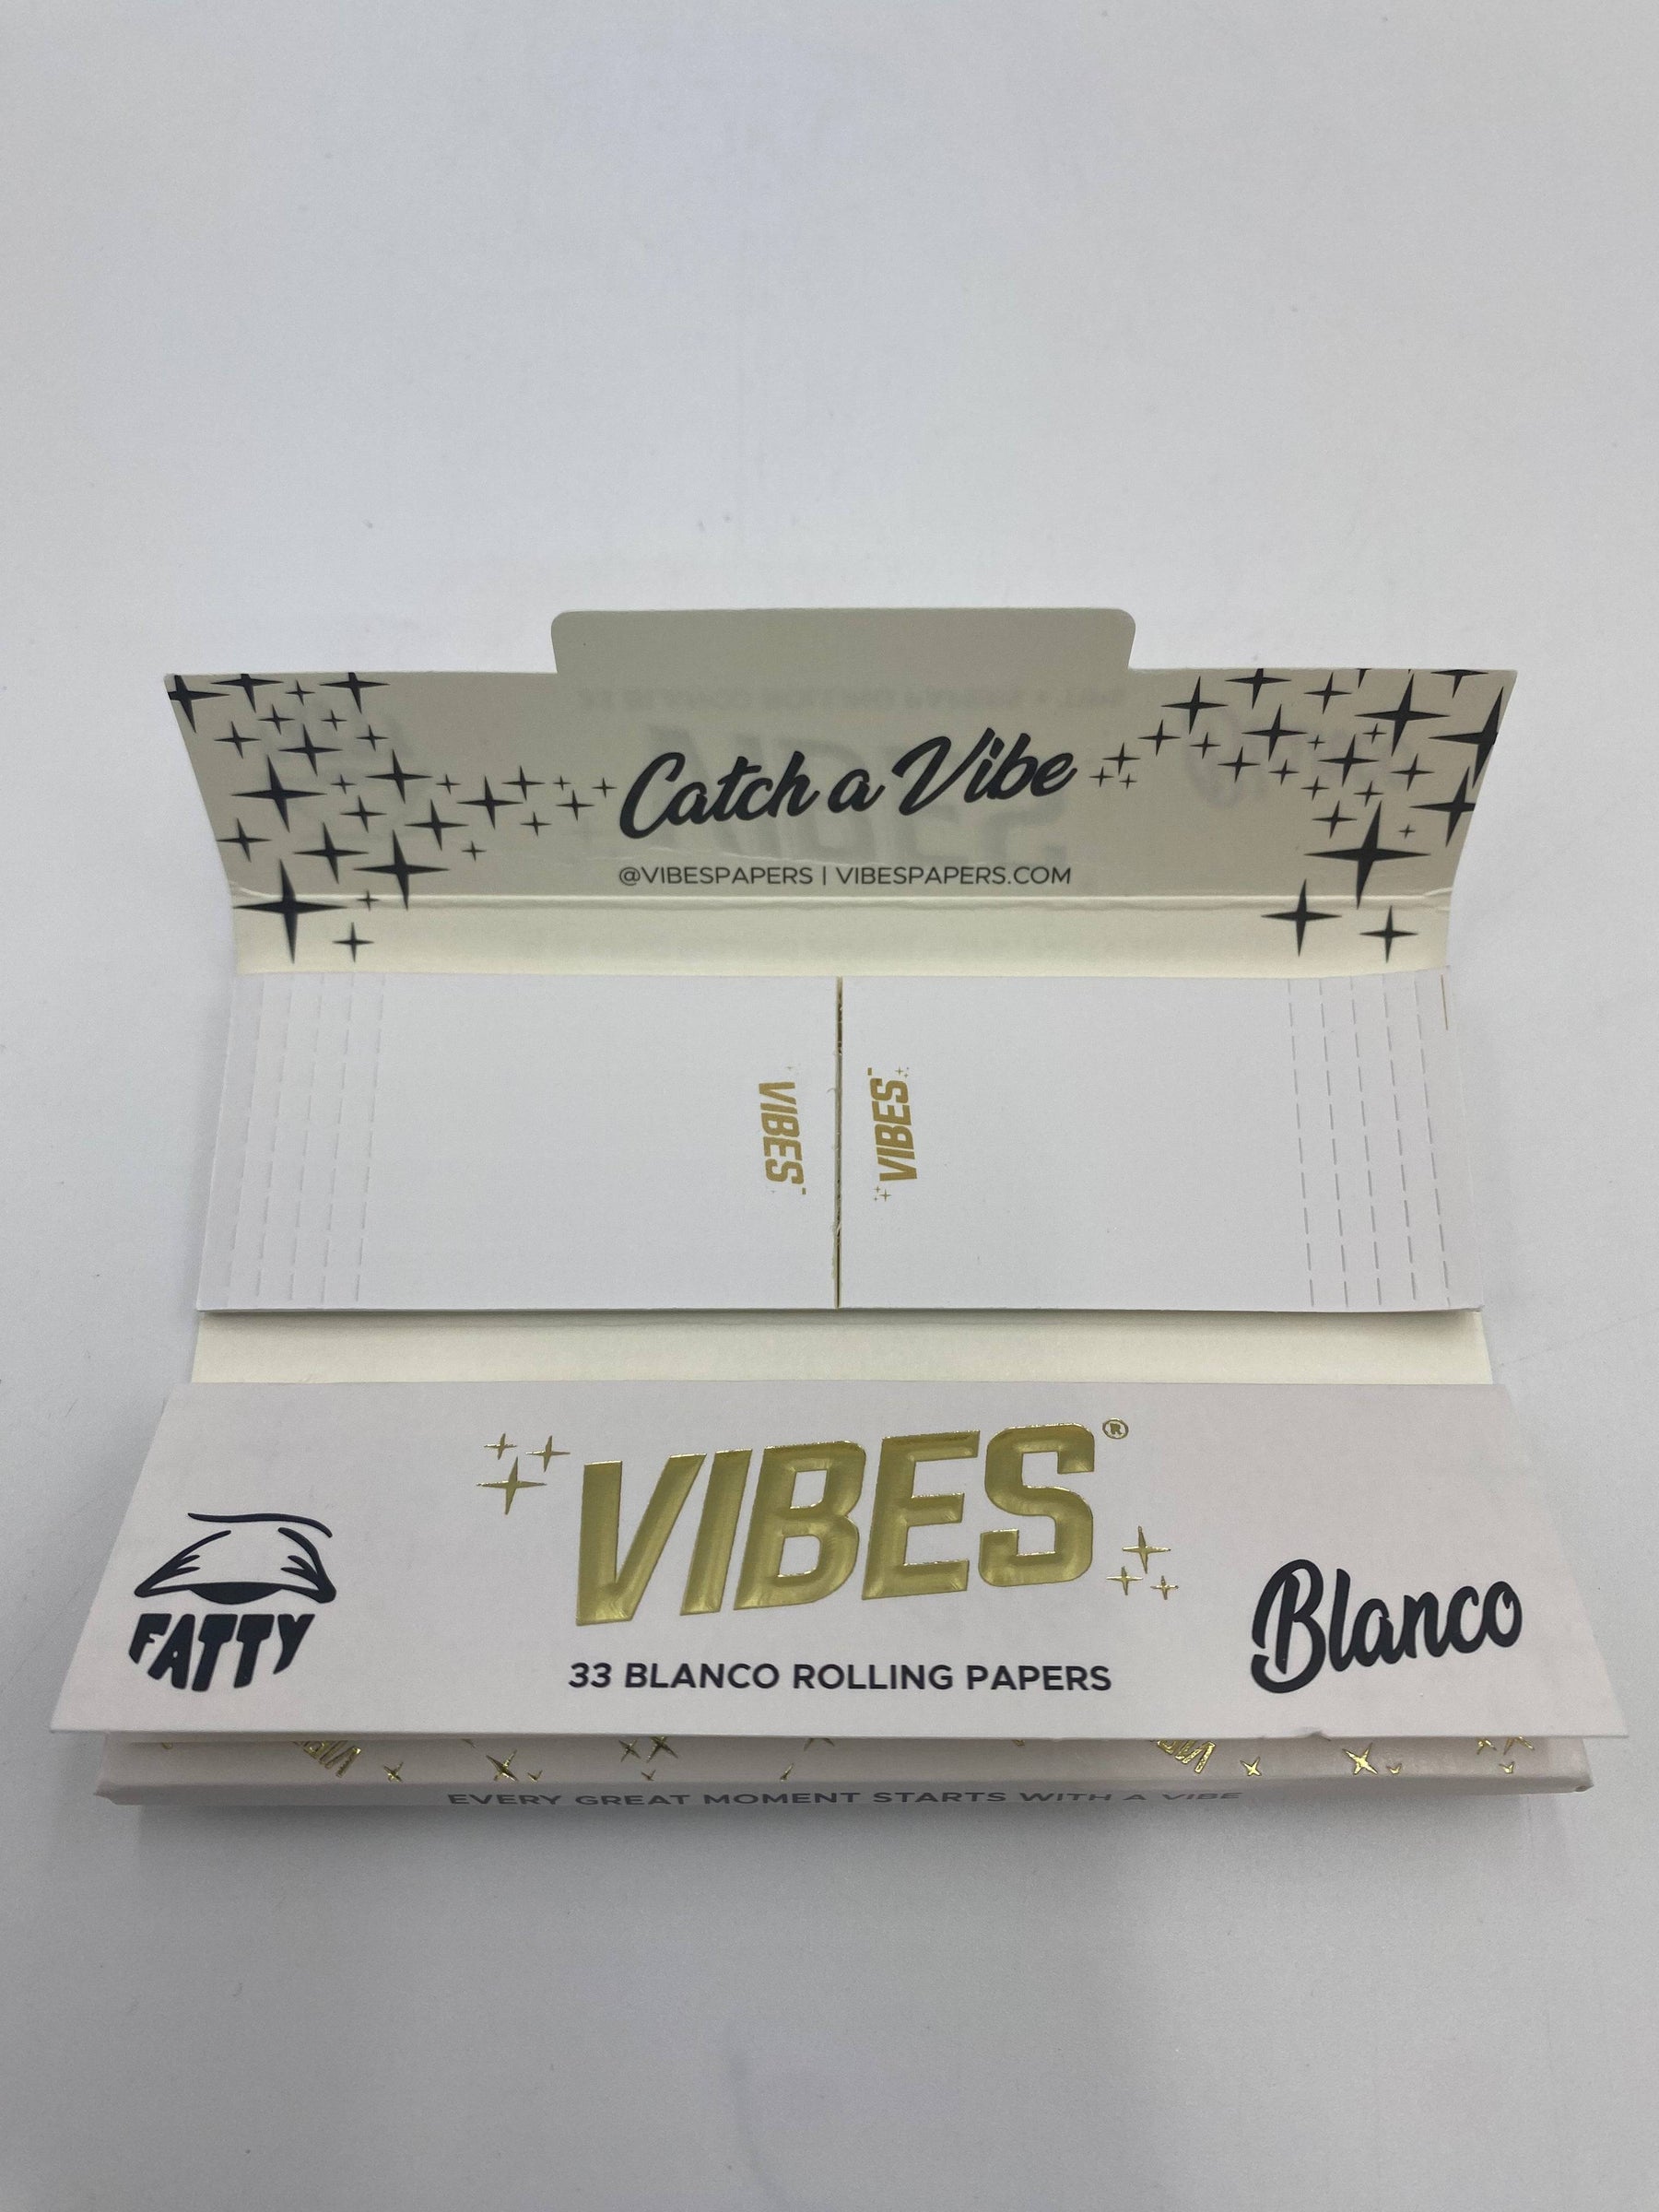 Vibes King Size Fatty Blanco Rolling Papers  W/ Tips  24ct Box 33 LPB